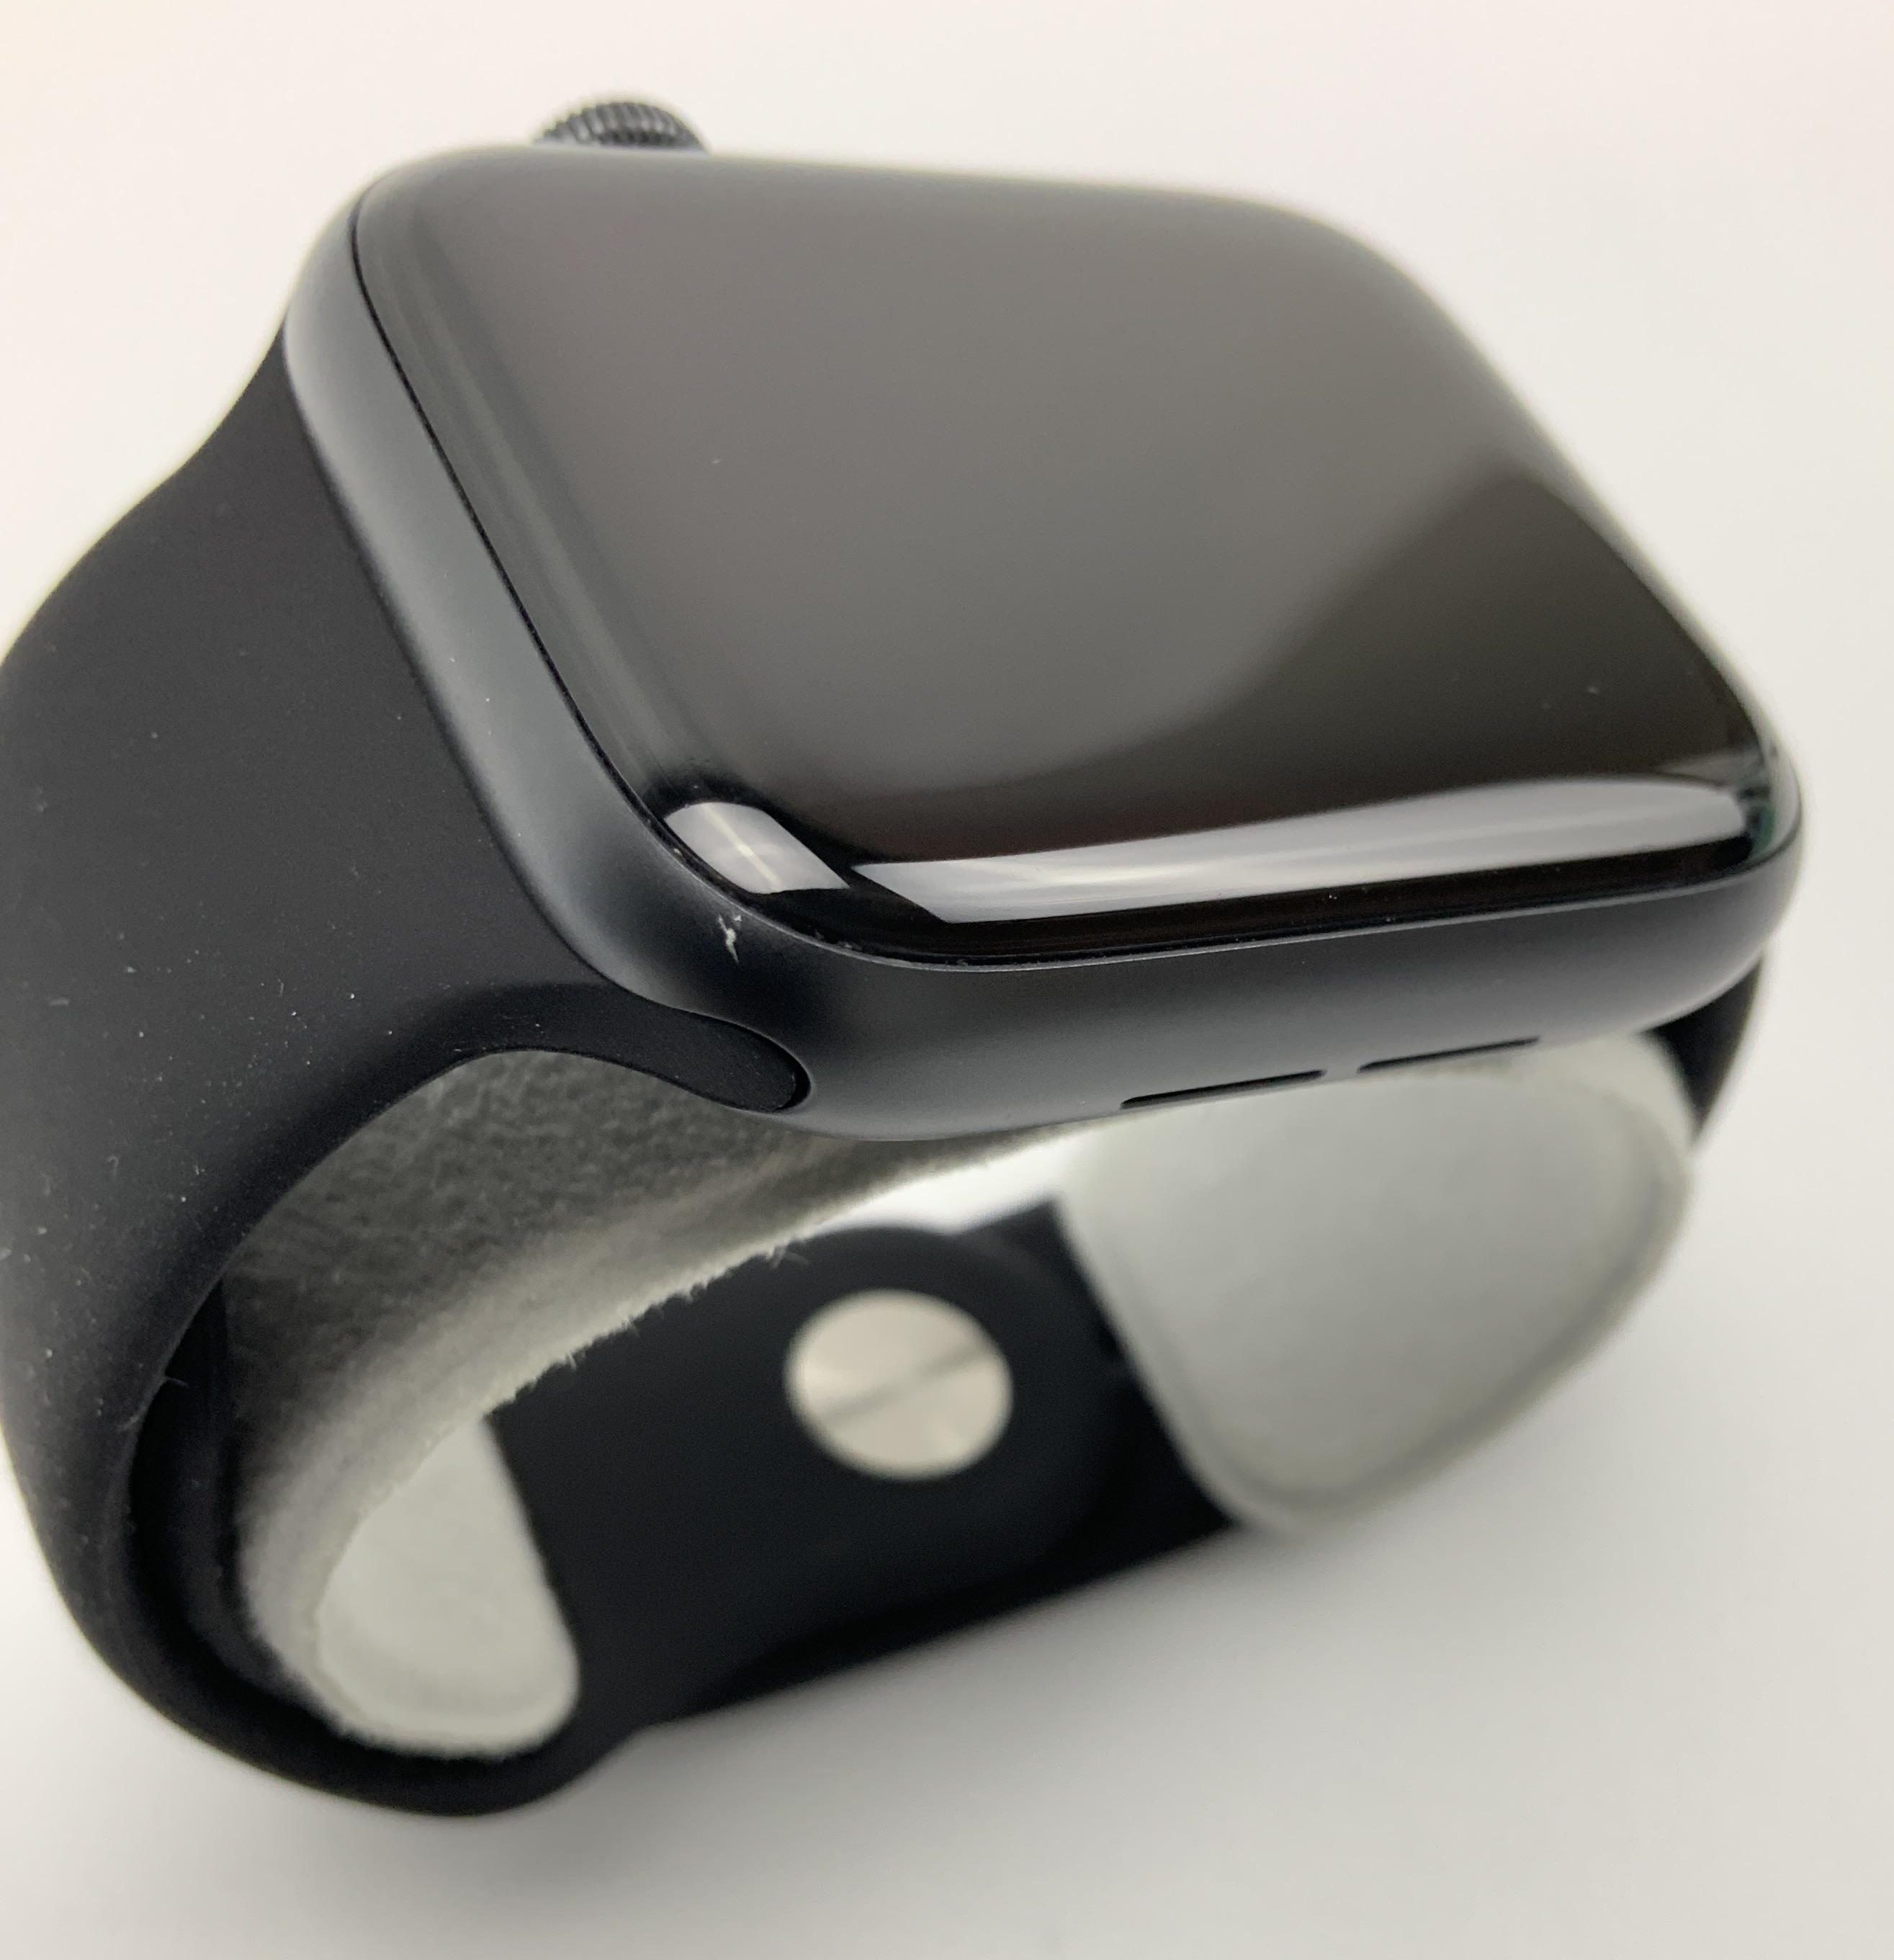 Watch Series 5 Aluminum Cellular (44mm), Space Gray, Afbeelding 2